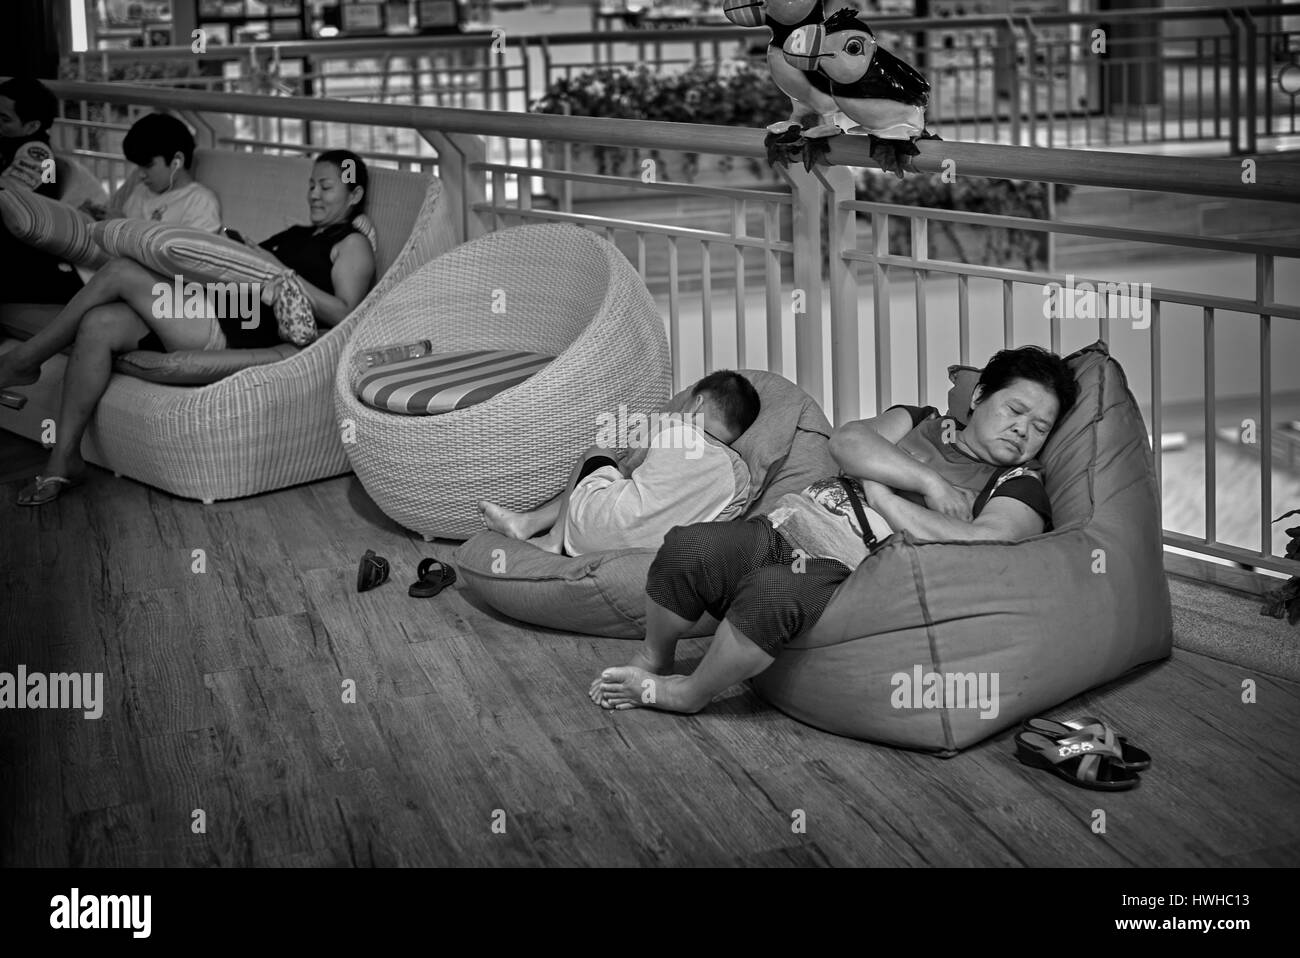 Thailand people sleeping and taking a mid day nap in the relaxing area of a local shopping mall black and white photography Stock Photo